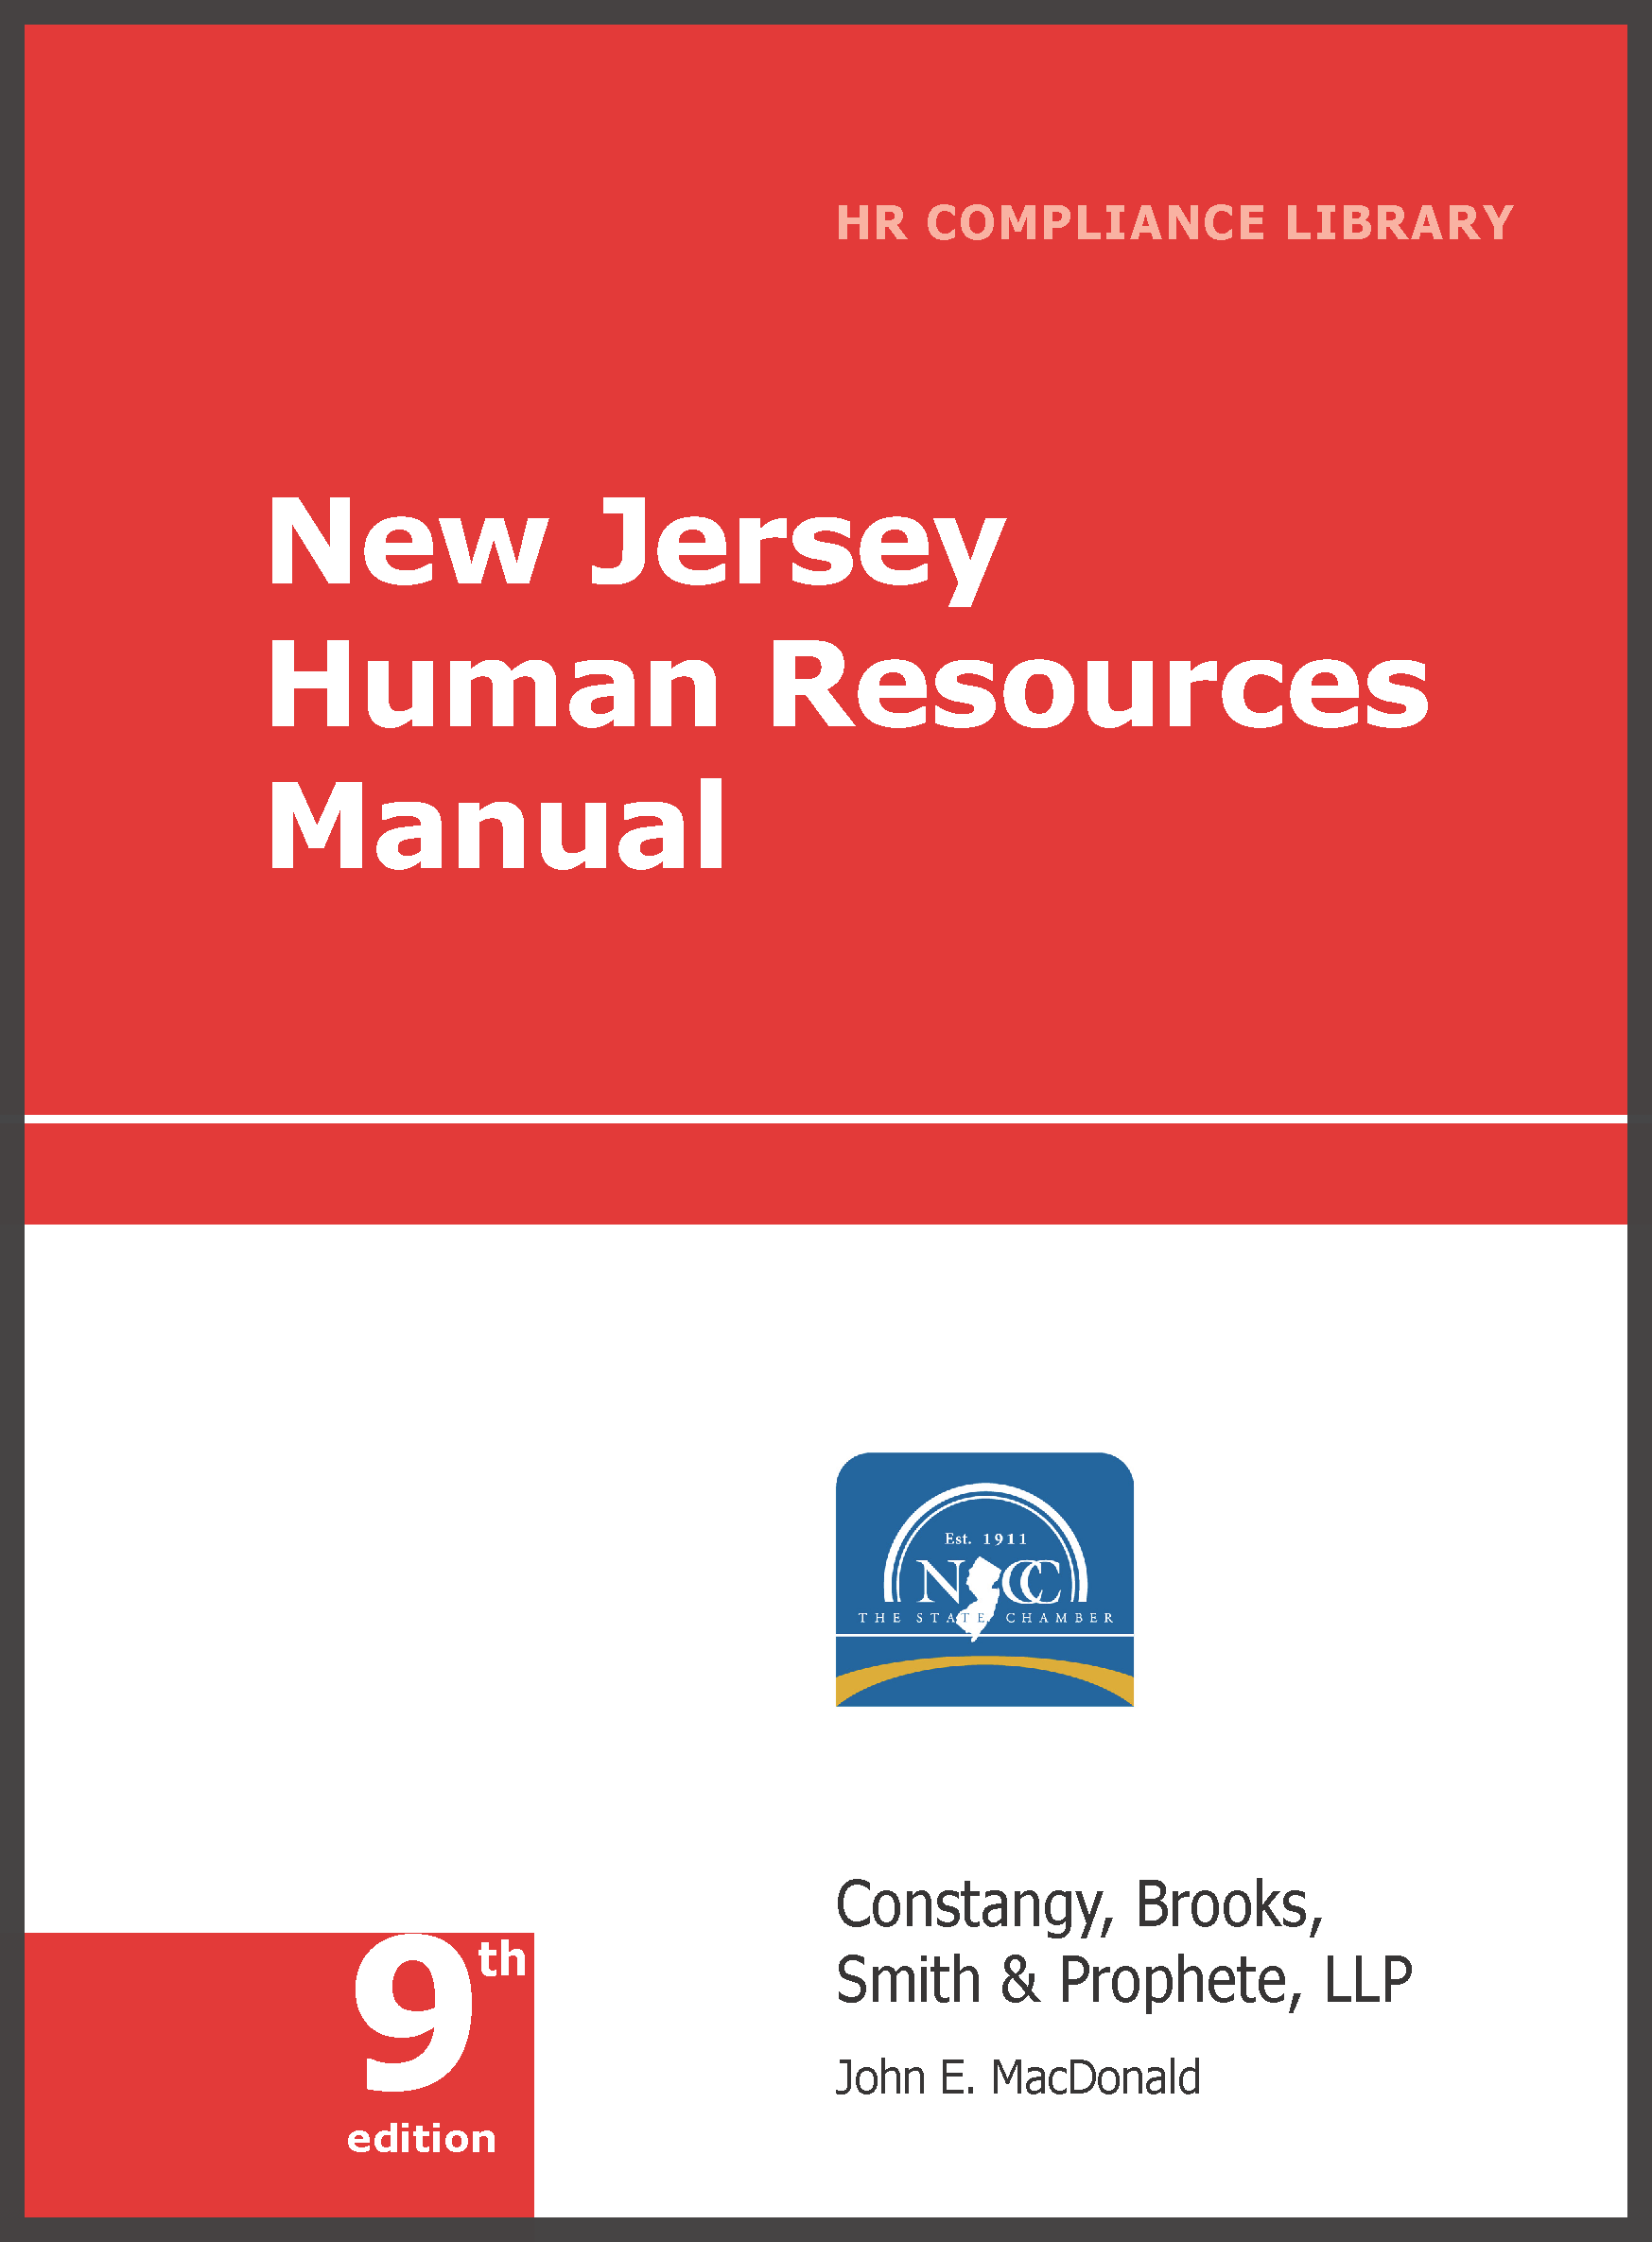 New Jersey Human Resources Library  employment law image, remote work, labor laws, employment laws, right to work, order of protection, minimum wage